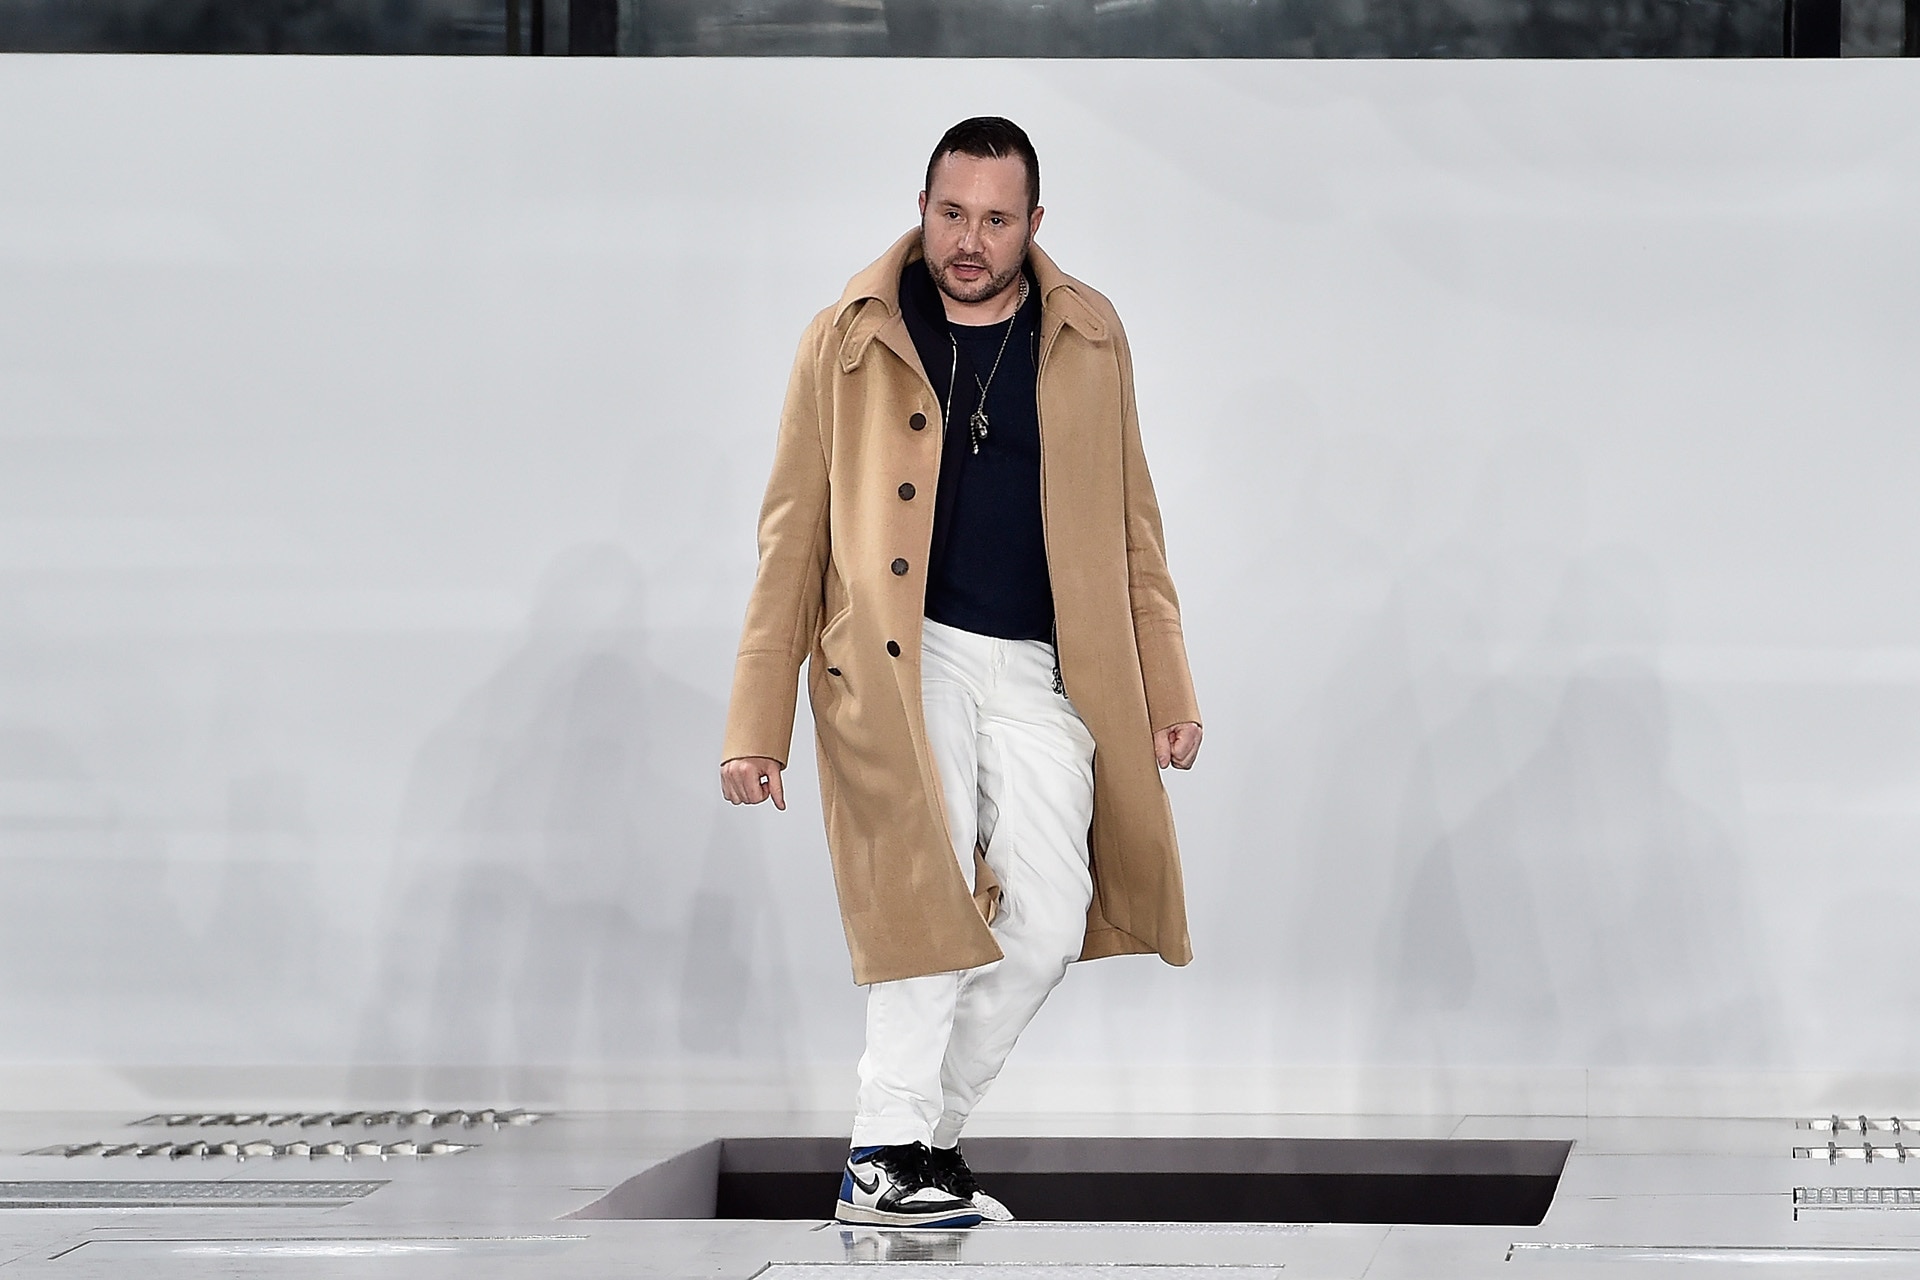 Everything You Need to Know About Kim Jones' Debut Collection for